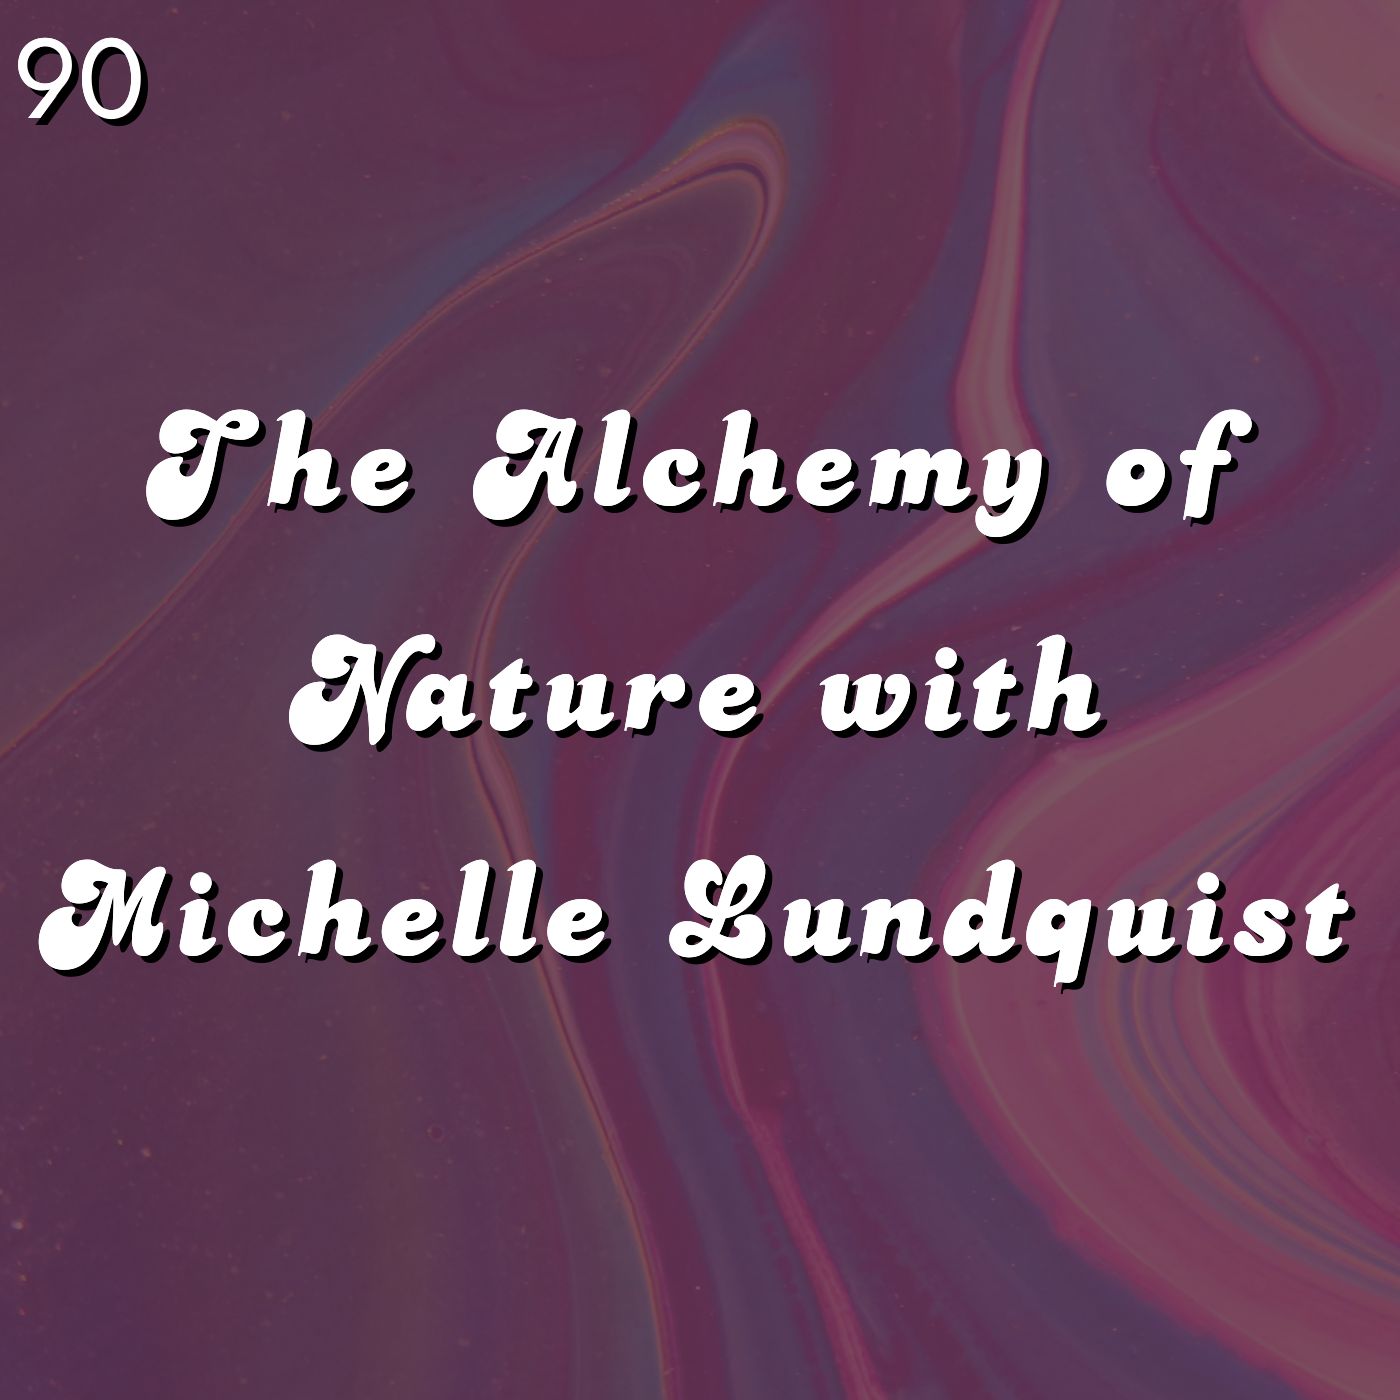 #90 - The Alchemy of Nature with Michelle Lundquist